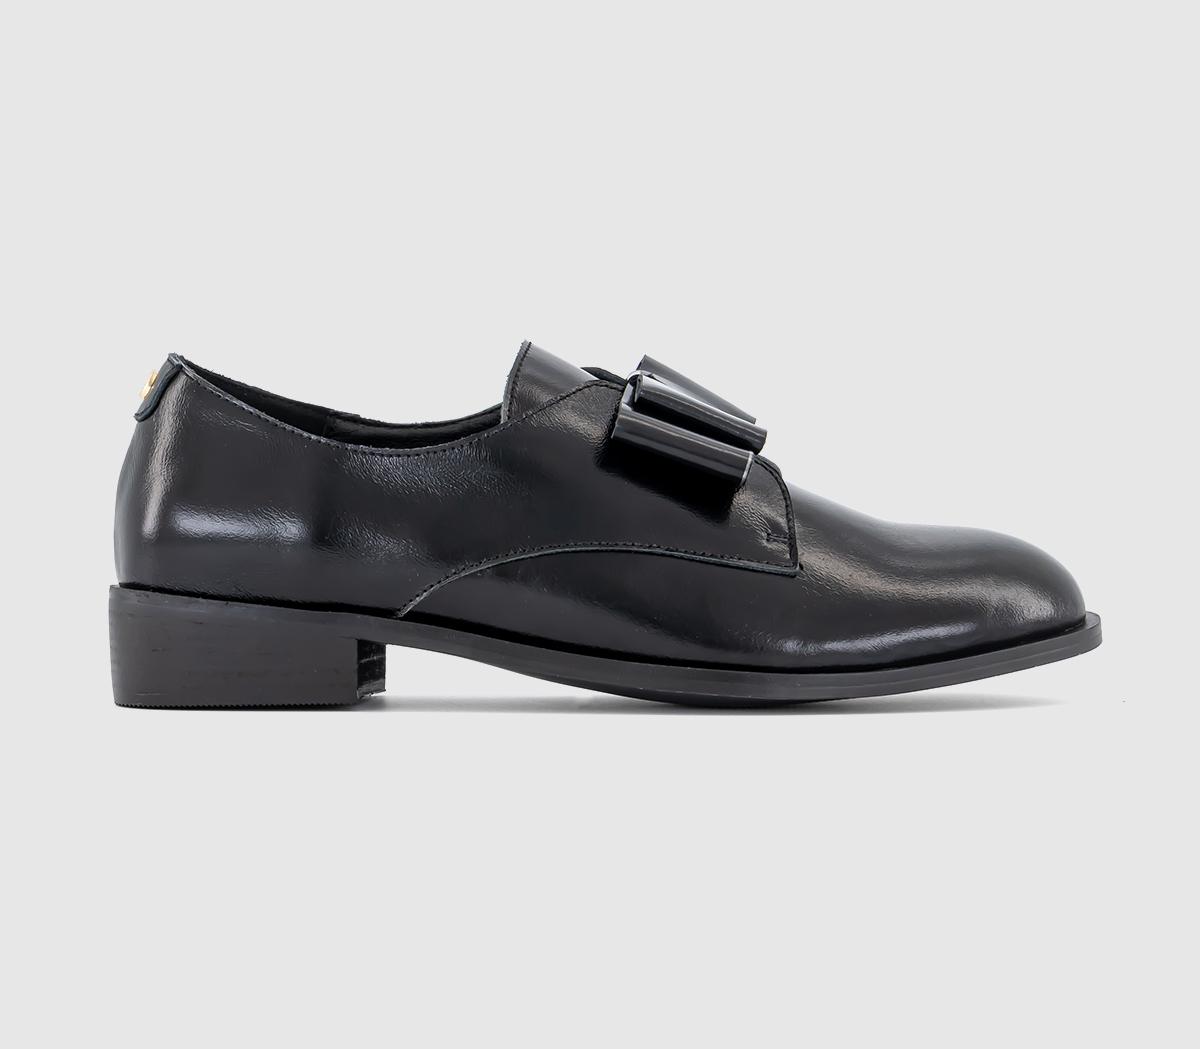 OFFICEFlextra High Vamp Leather Bow ShoesBlack Leather